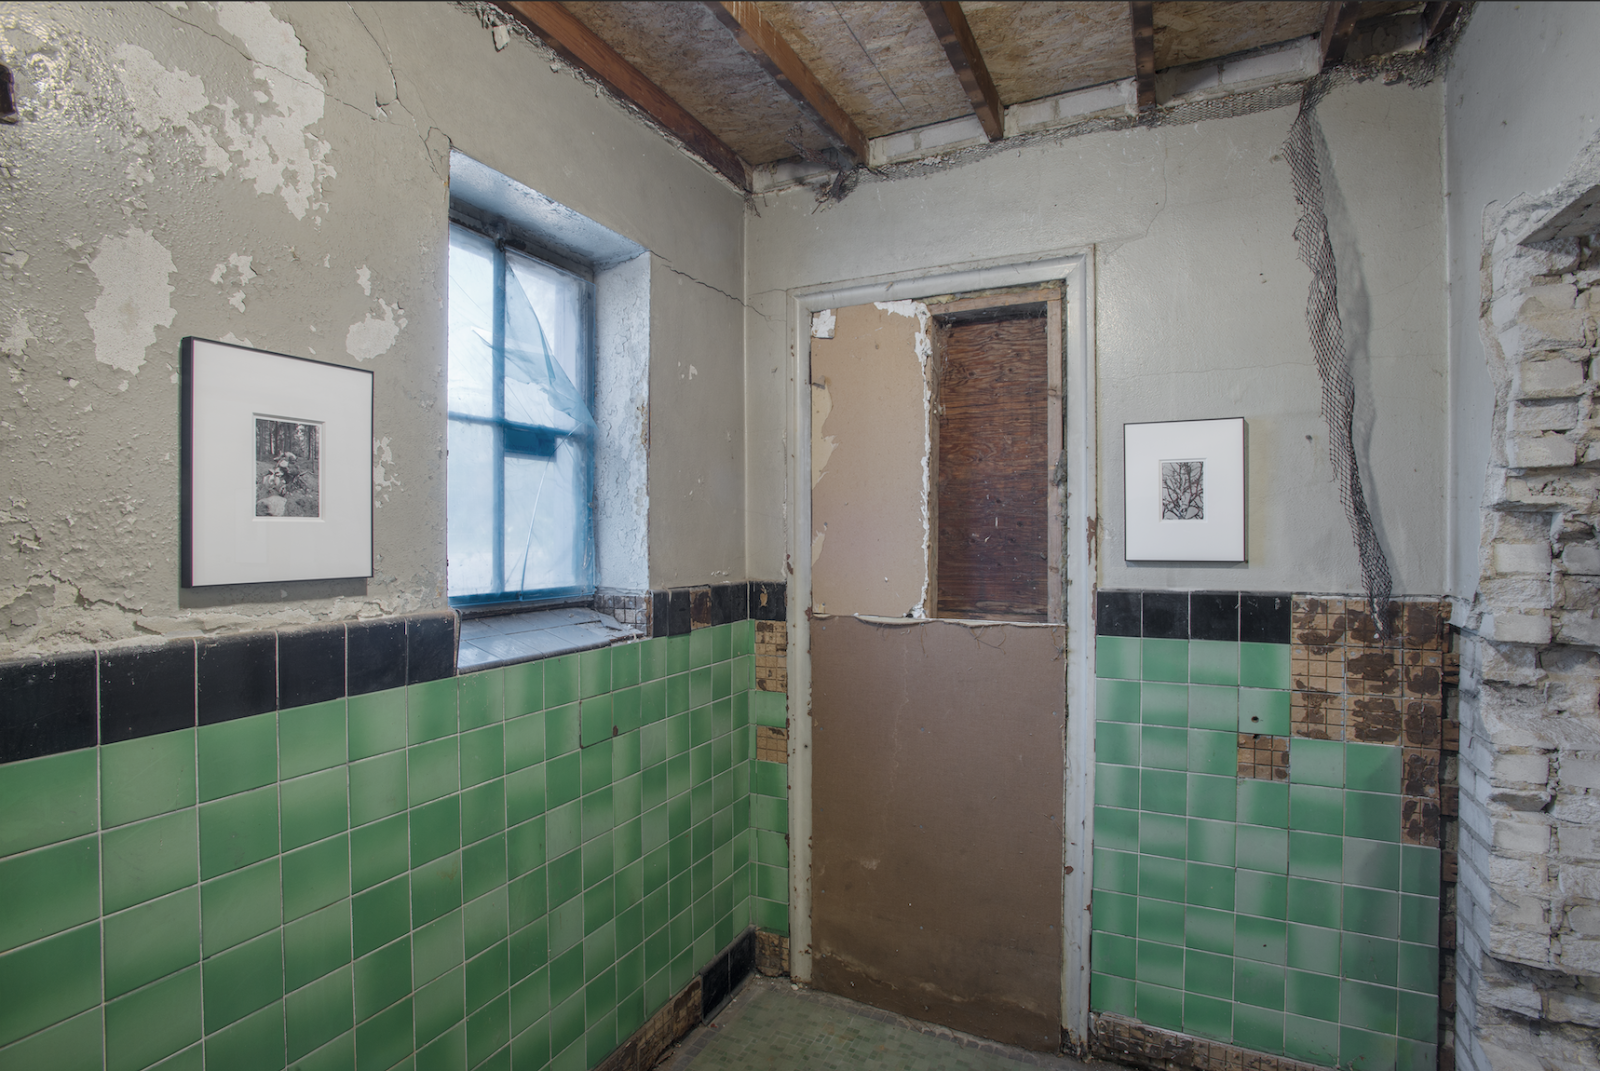 Image: Tetsuya Yamada, 3801 PARK AVE. TEMPORARY, May 20 – May 21, 2016. The inside of a dilapidated gas station with green tile on the bottom half of the walls while paint on the upper half chips and rips. The architecture is exposed. Two framed photos hang on the walls. Image courtesy of the artist.  